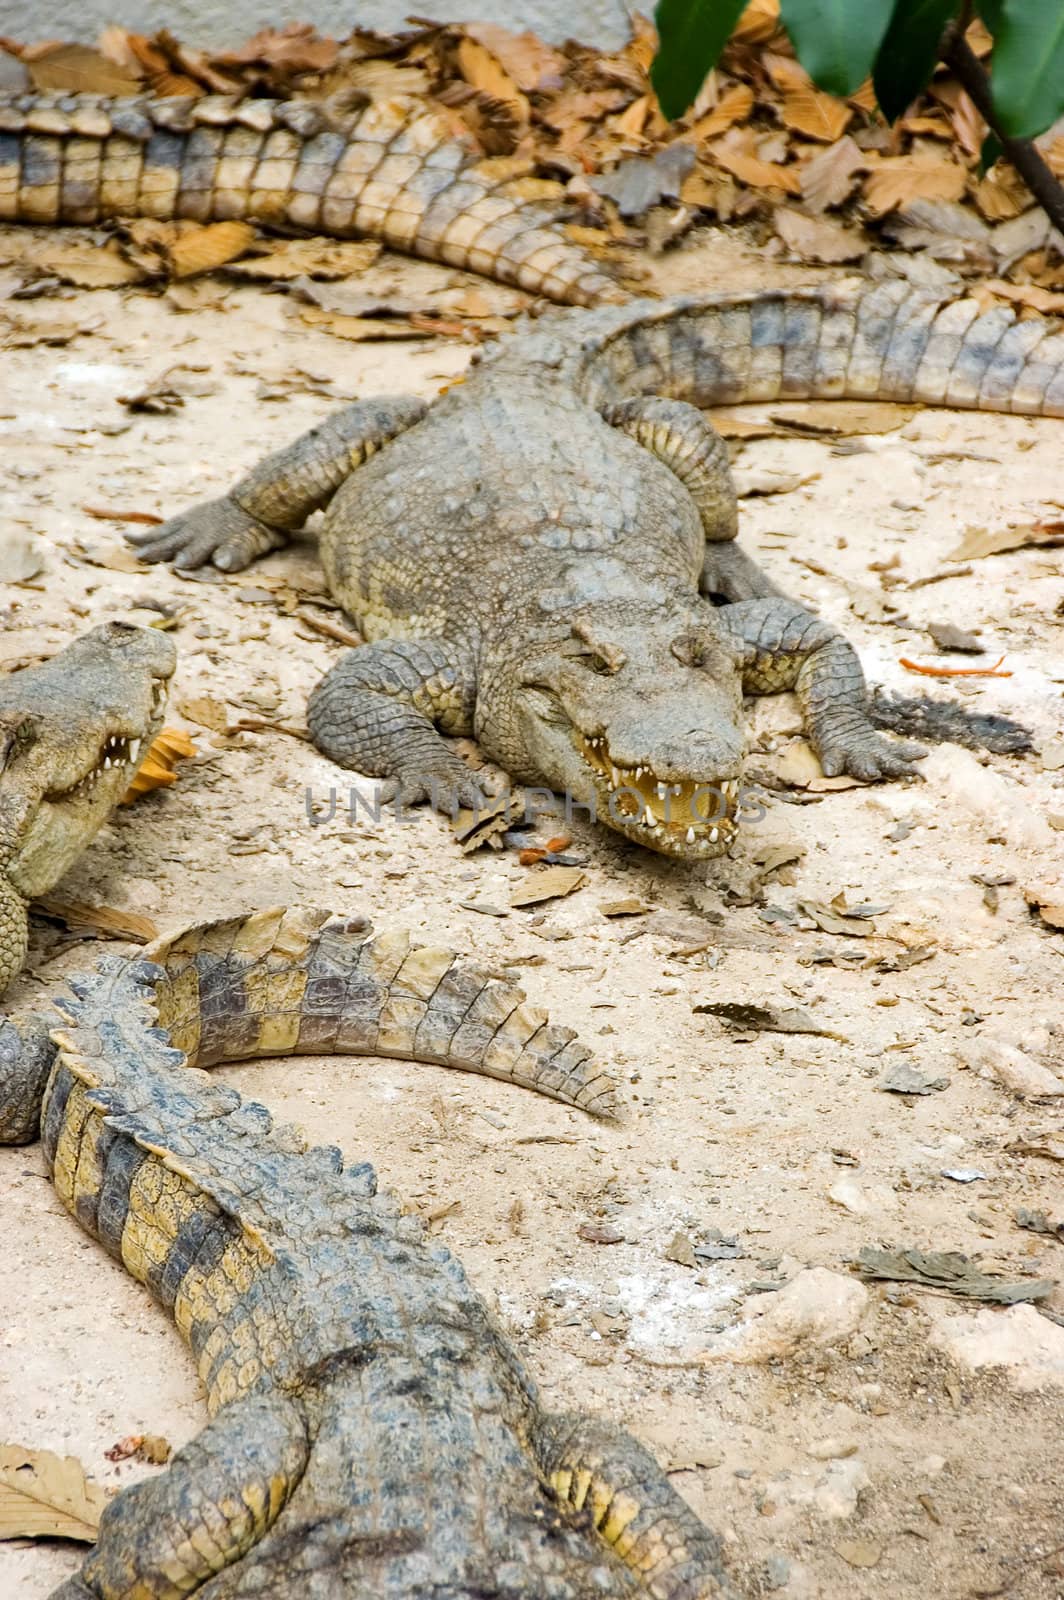 group of crocodiles by jsompinm